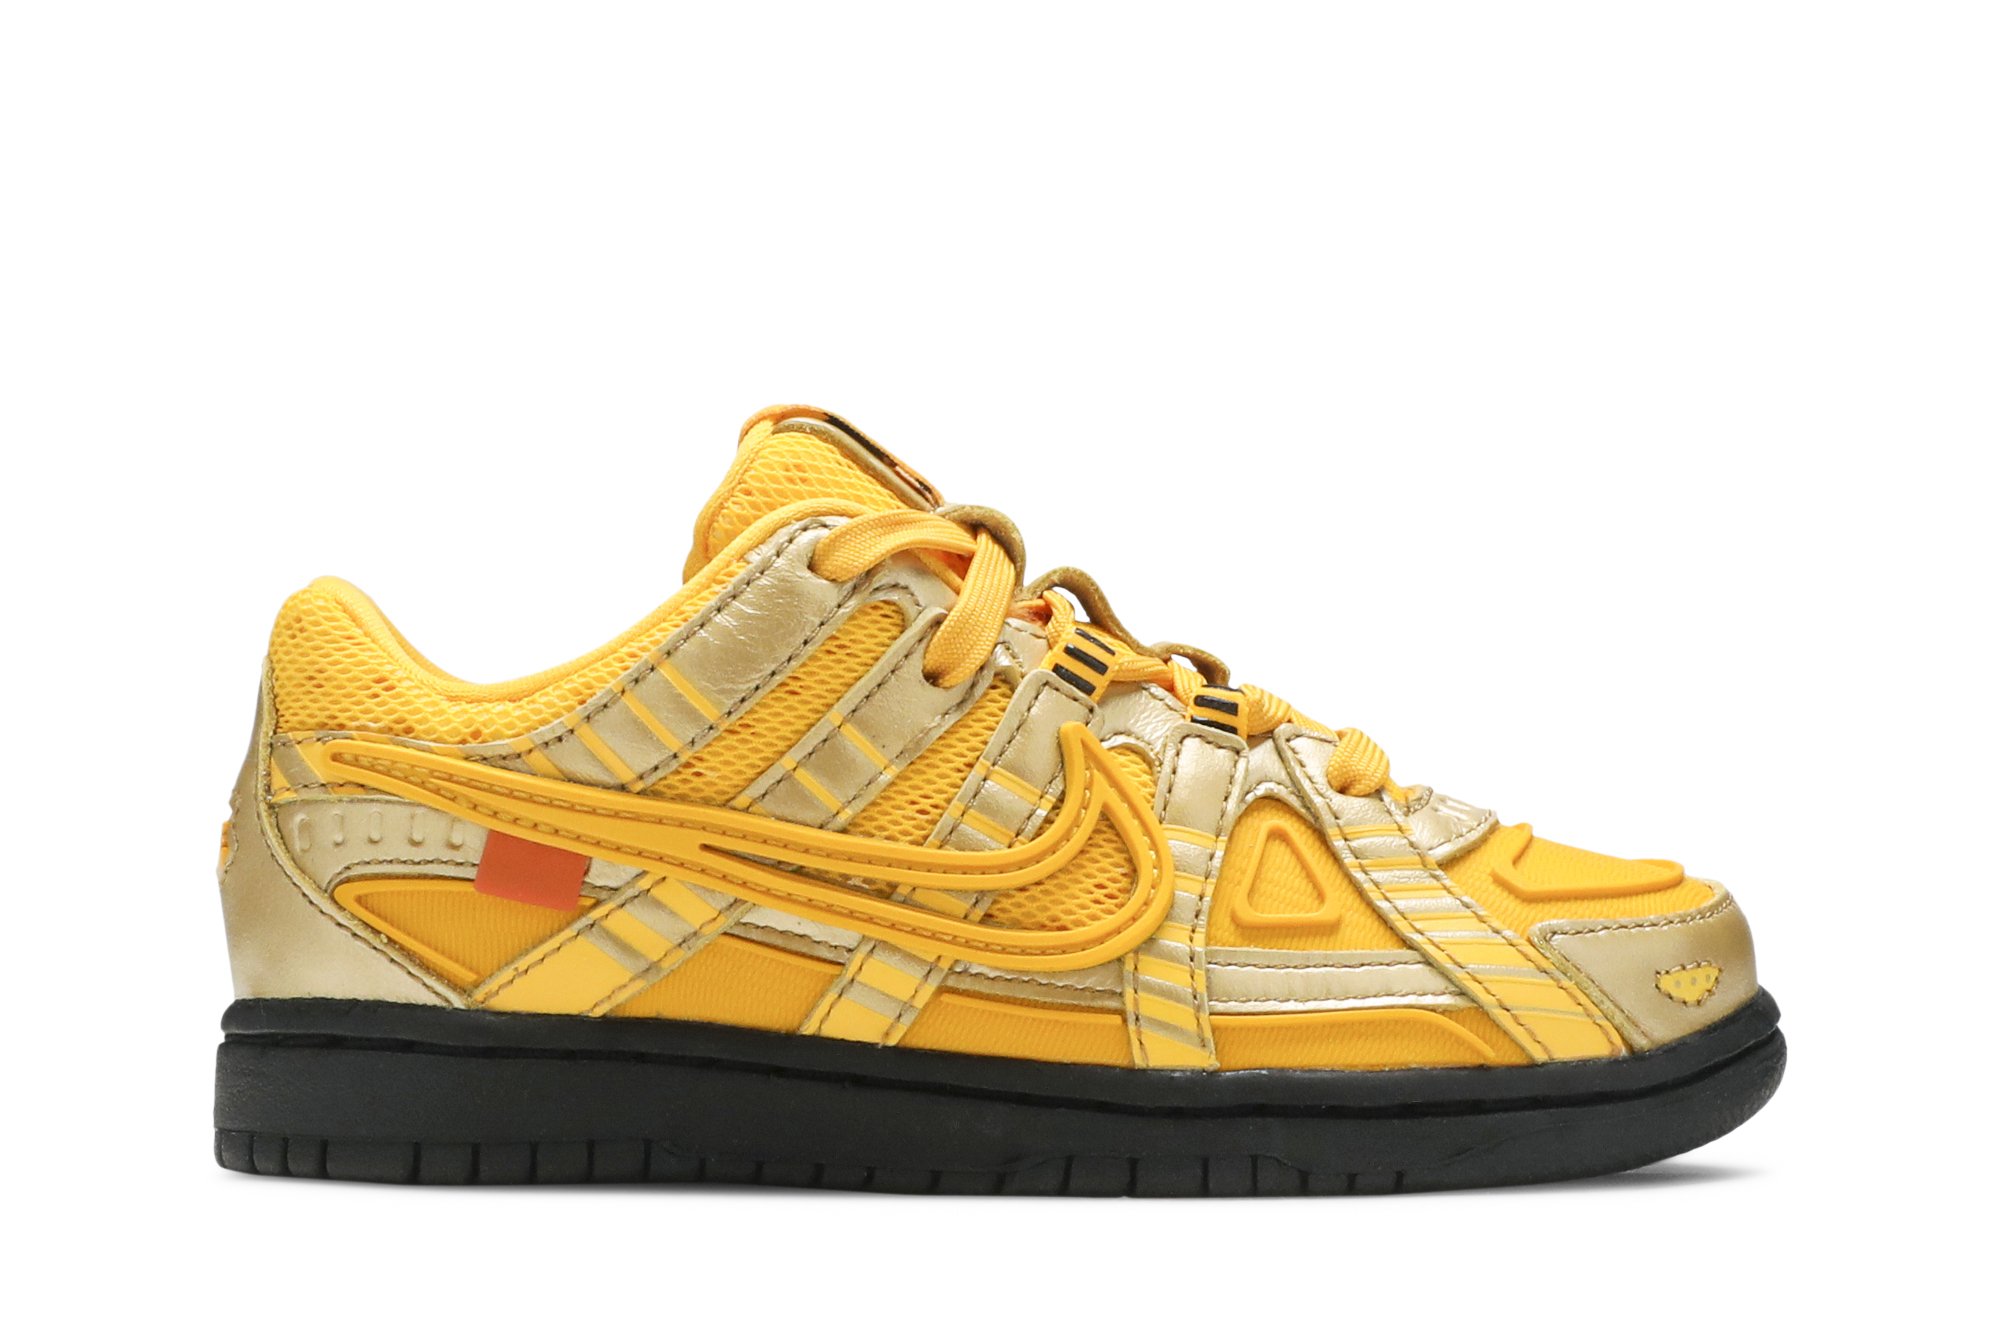 Off-White x Rubber Dunk PS 'University Gold'